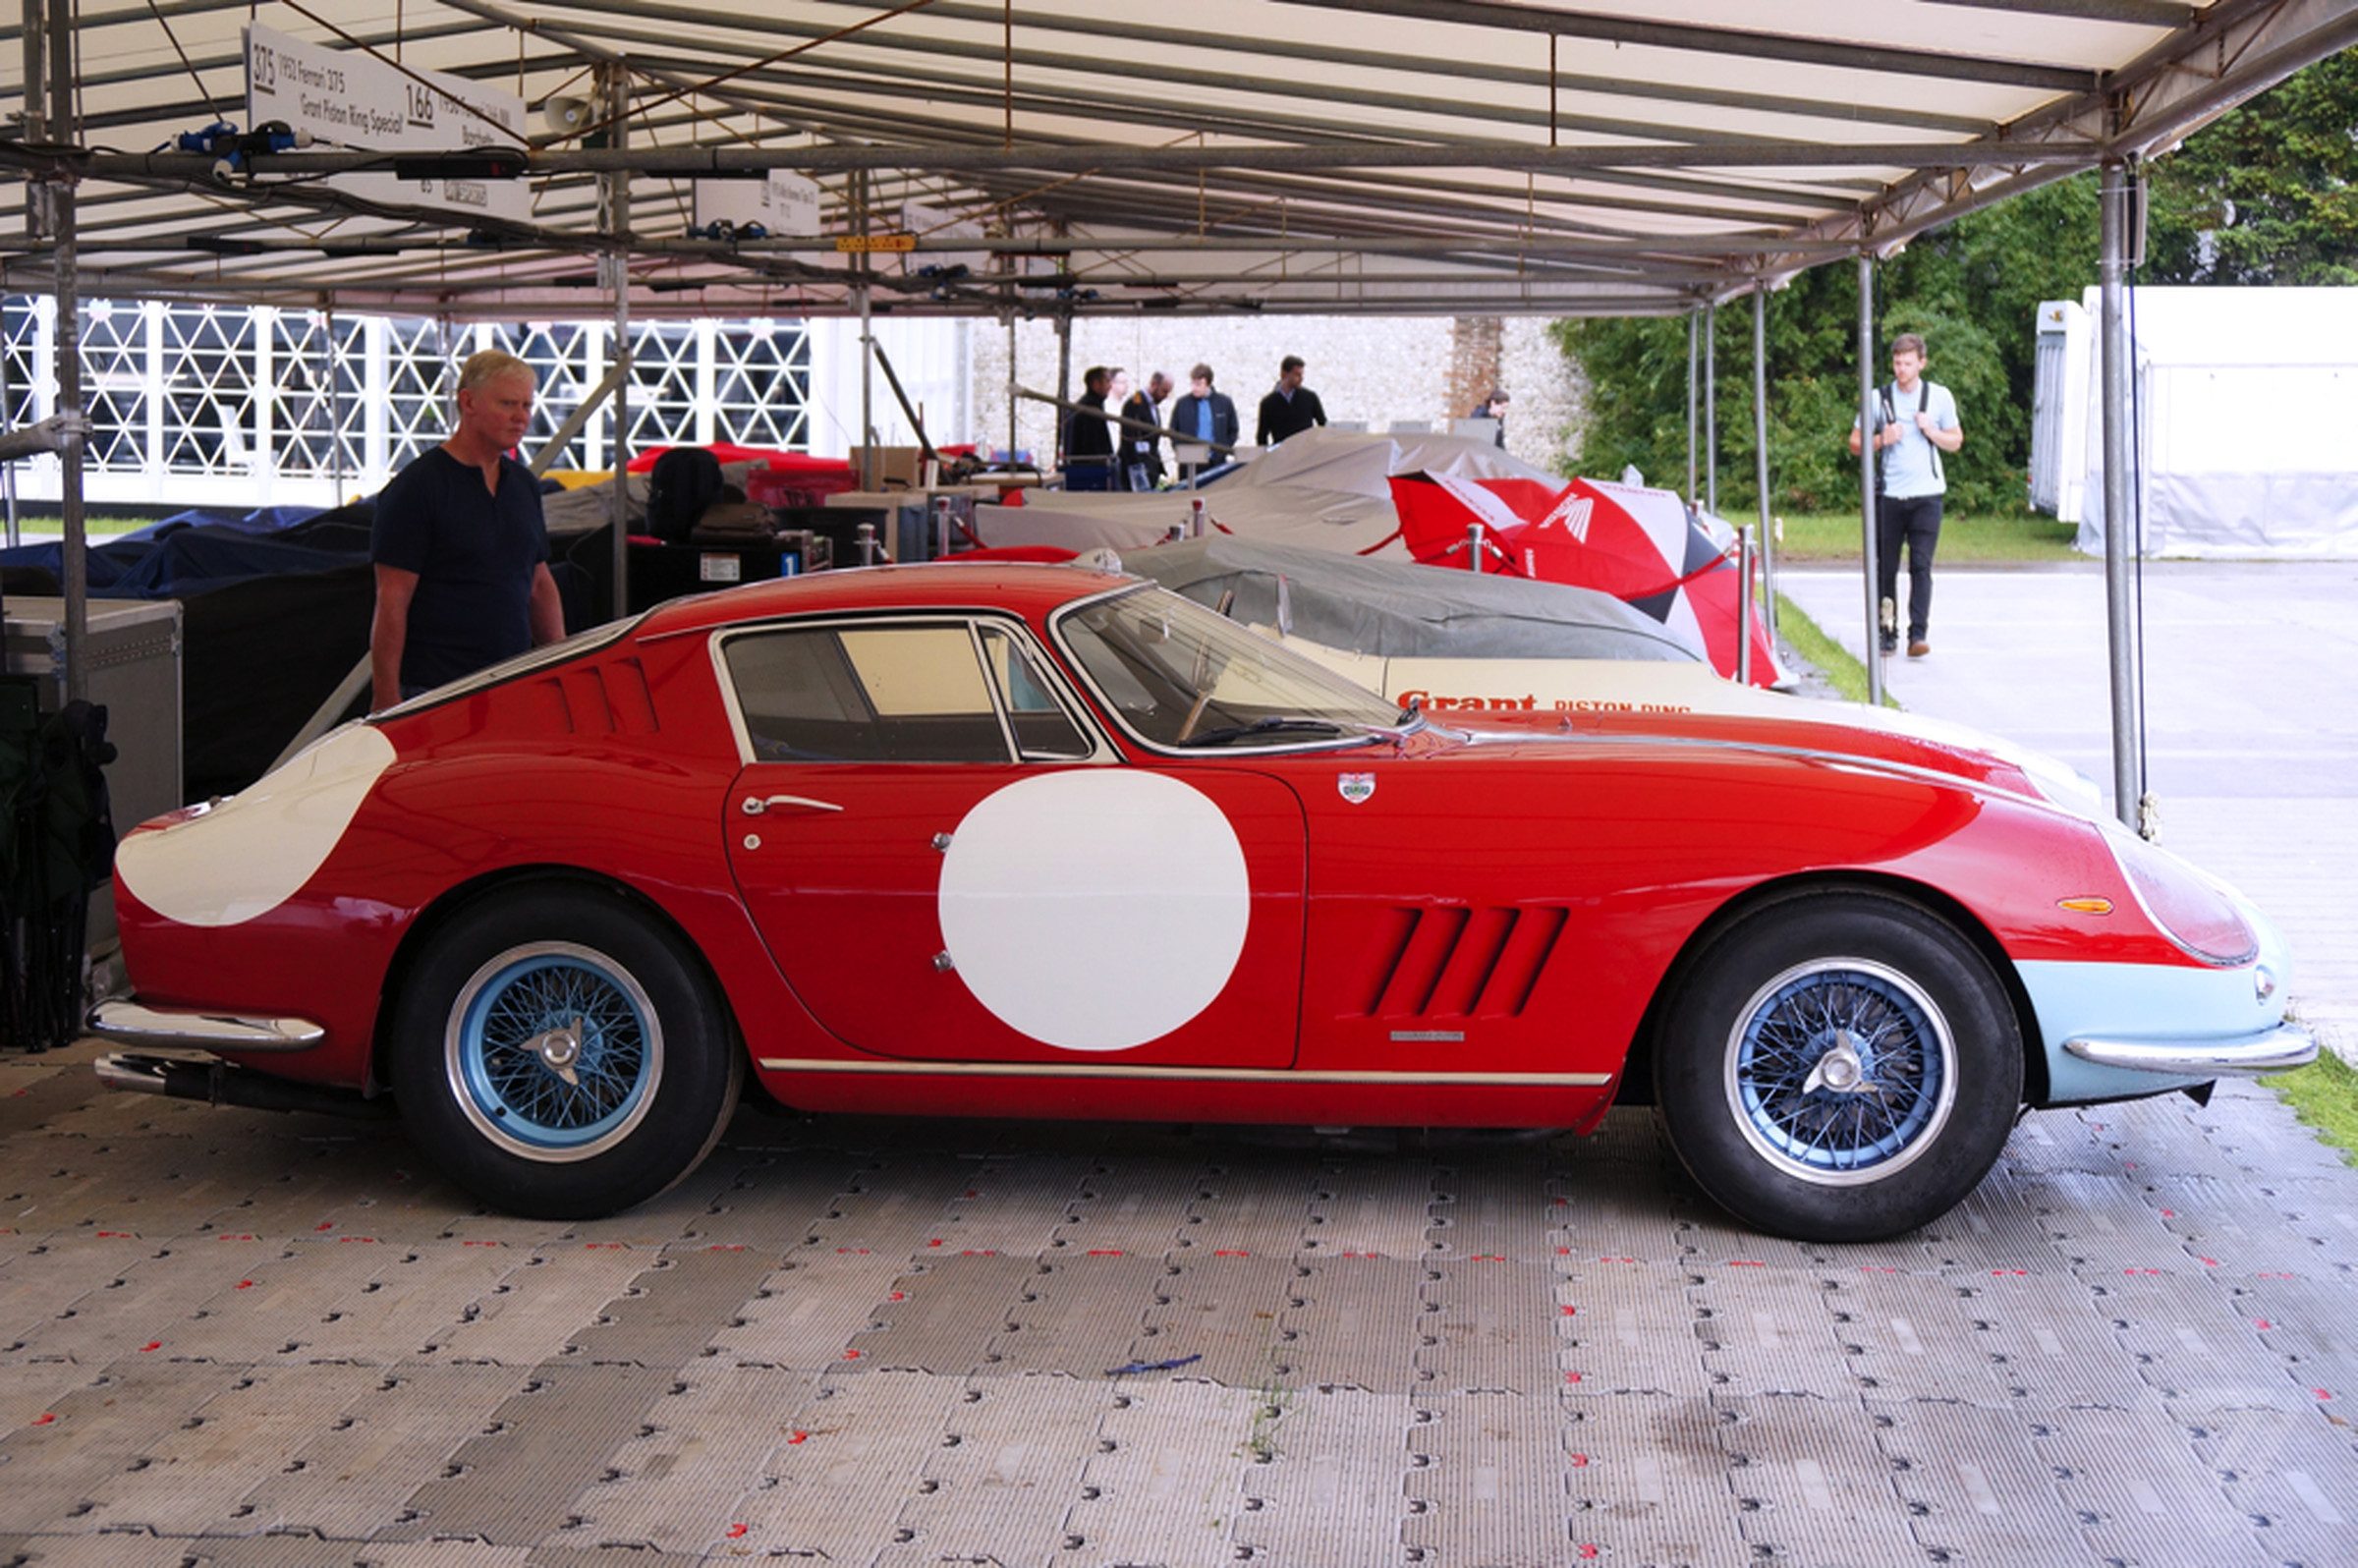 Goodwood Festival of Speed 2016 classic cars, part 1